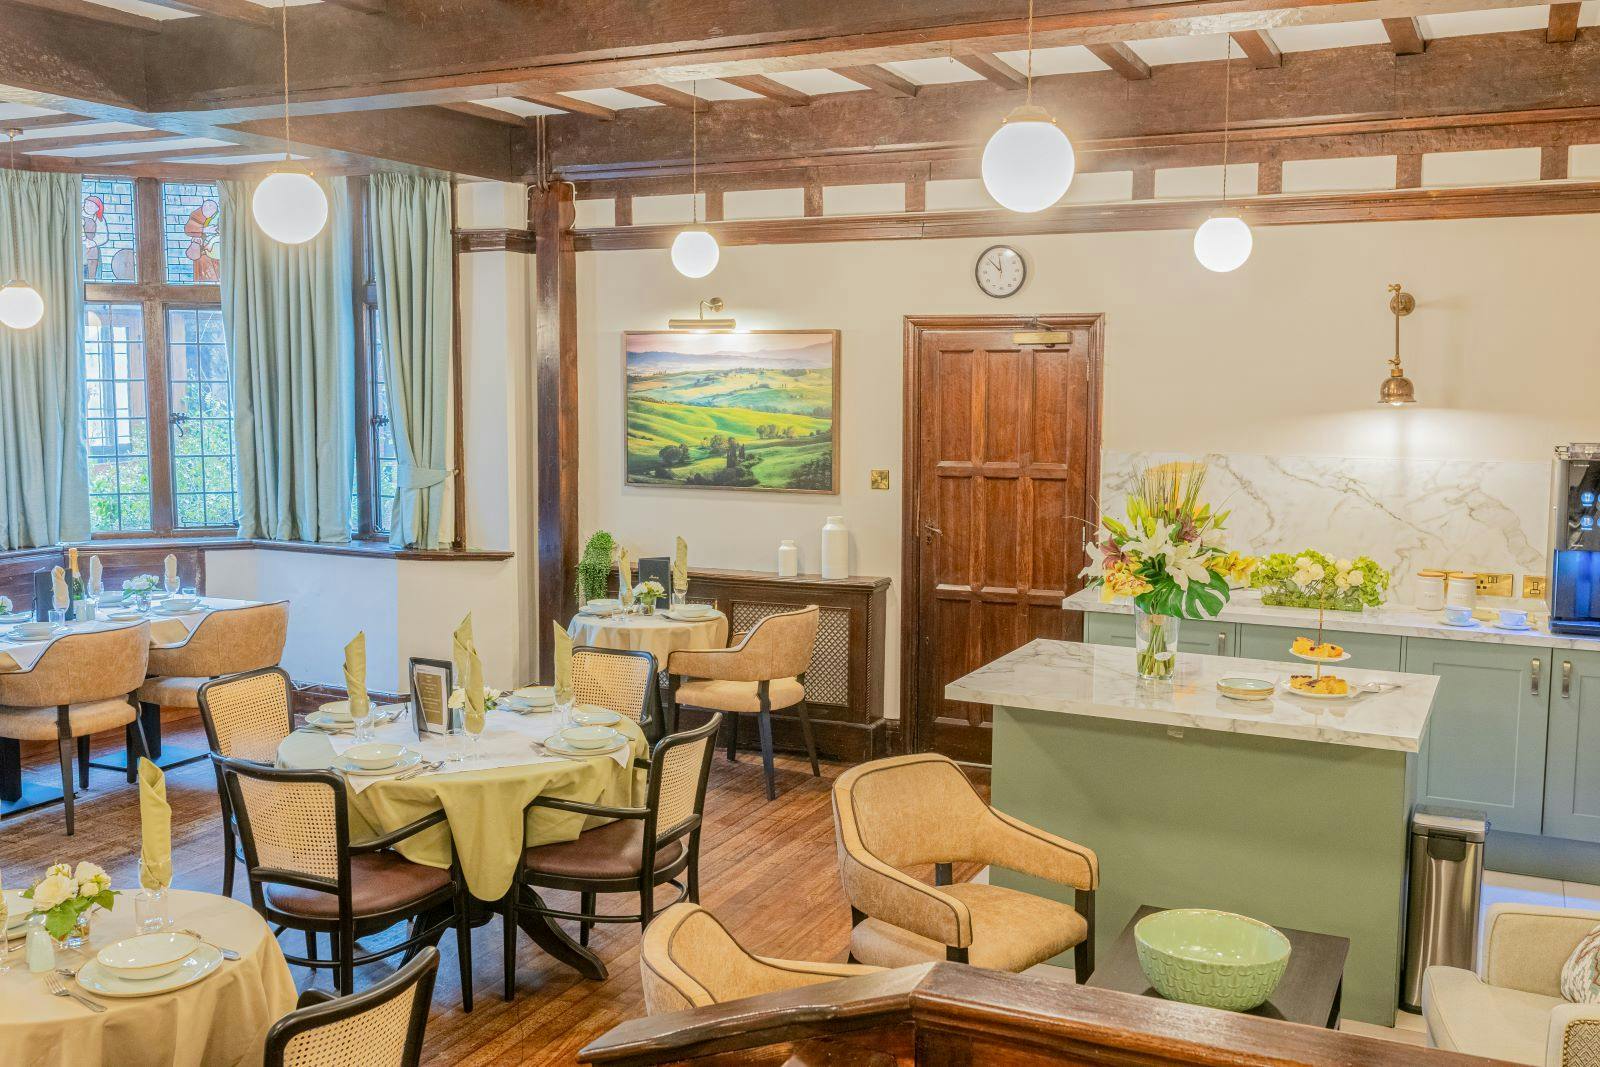 Dining Room at Coxhill Manor Care Home in Woking, Surrey